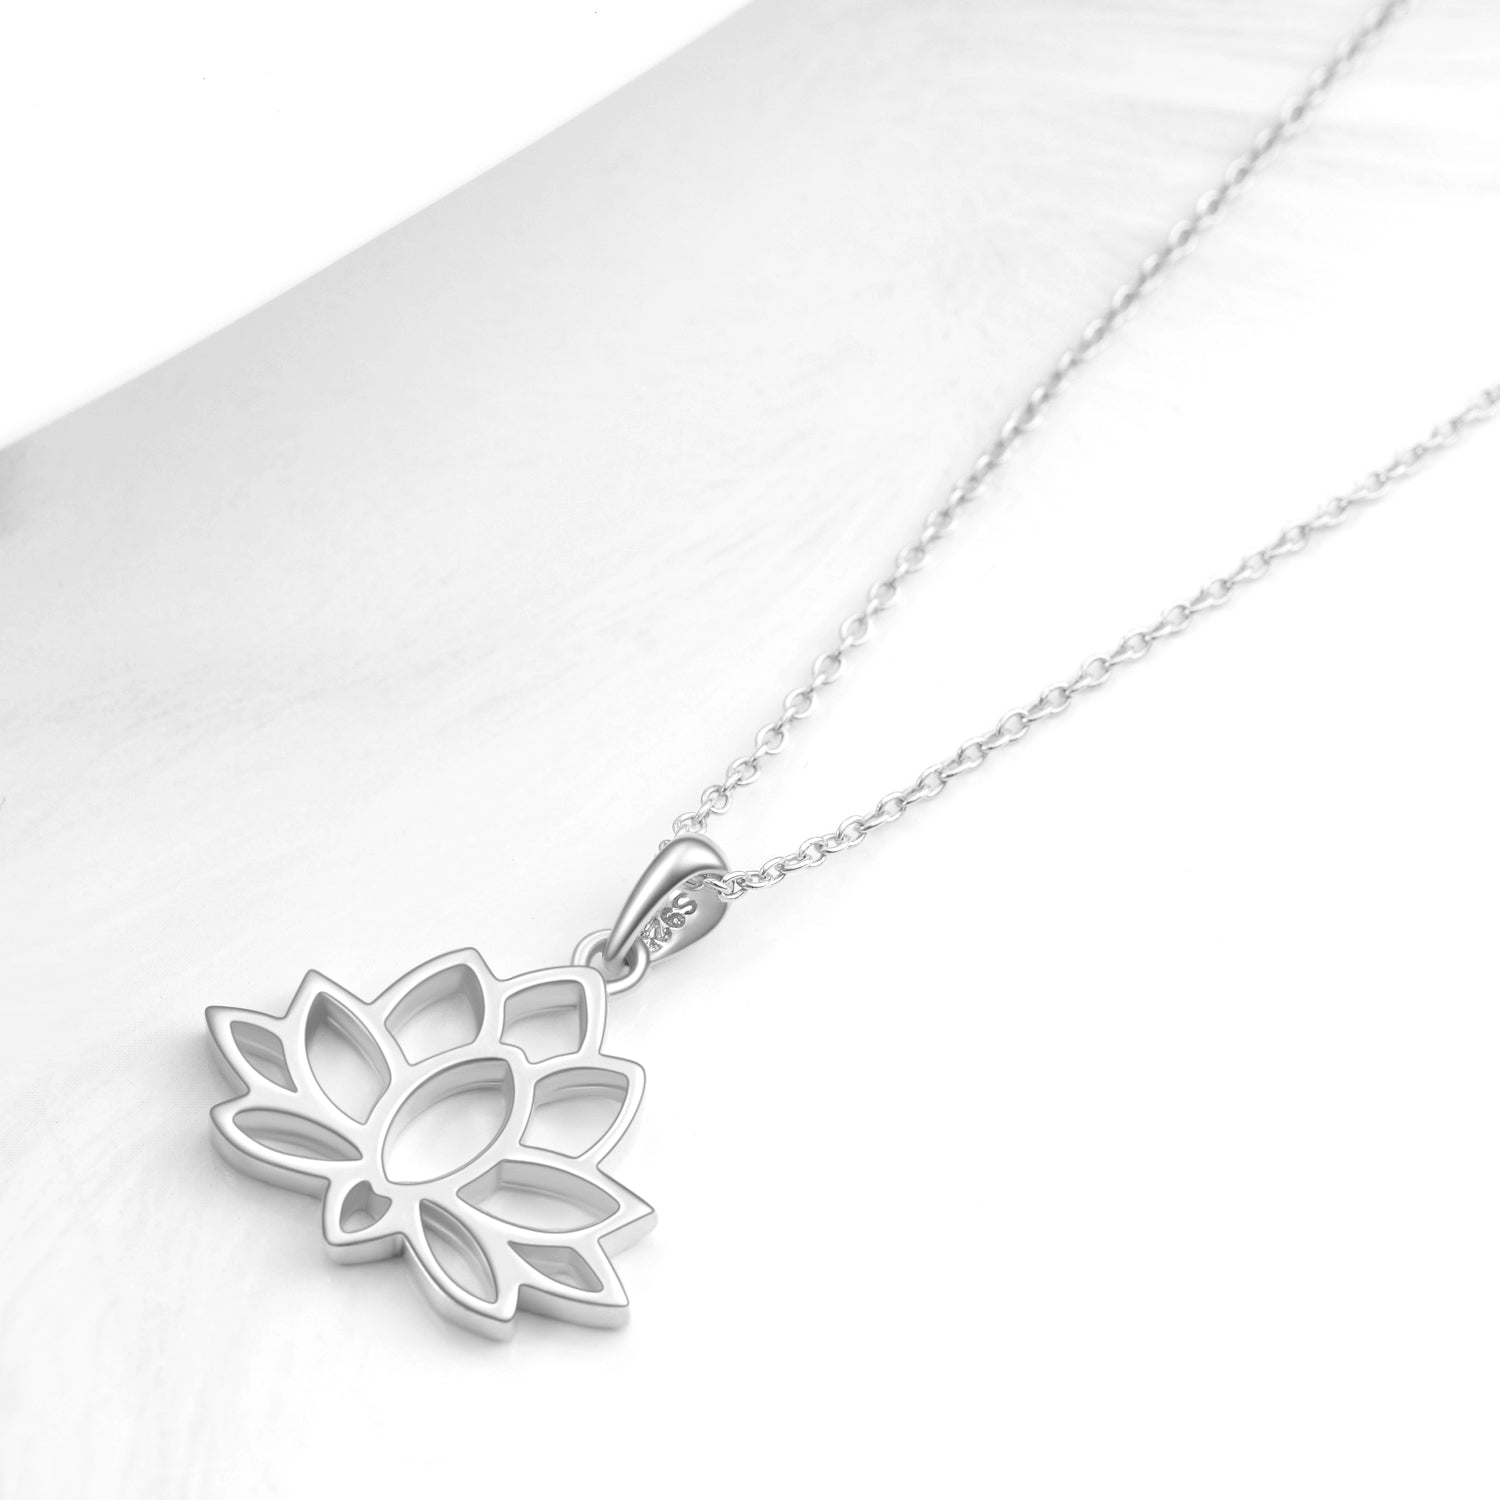 Water Lily Plant Engraved Hollow Necklace Design Lotus Favorite Necklace